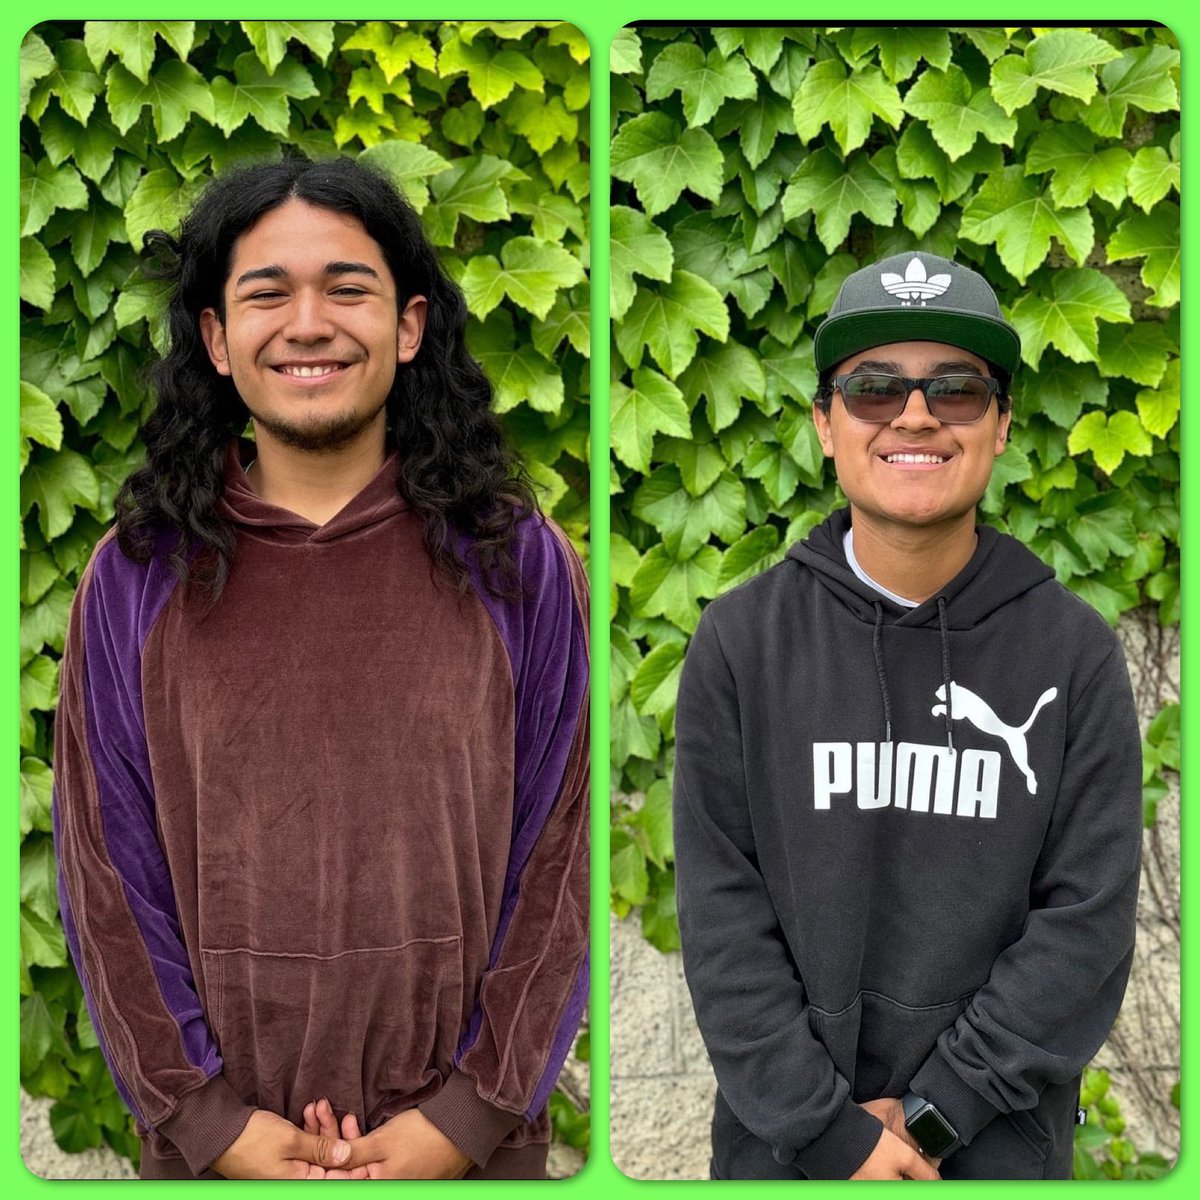 Congratulations to our Drum Majors — Marcos and Max! I am excited to see you lead the Kaiser Catamount Pride Band and Colorguard! 🎵🎉💚 #GoCats